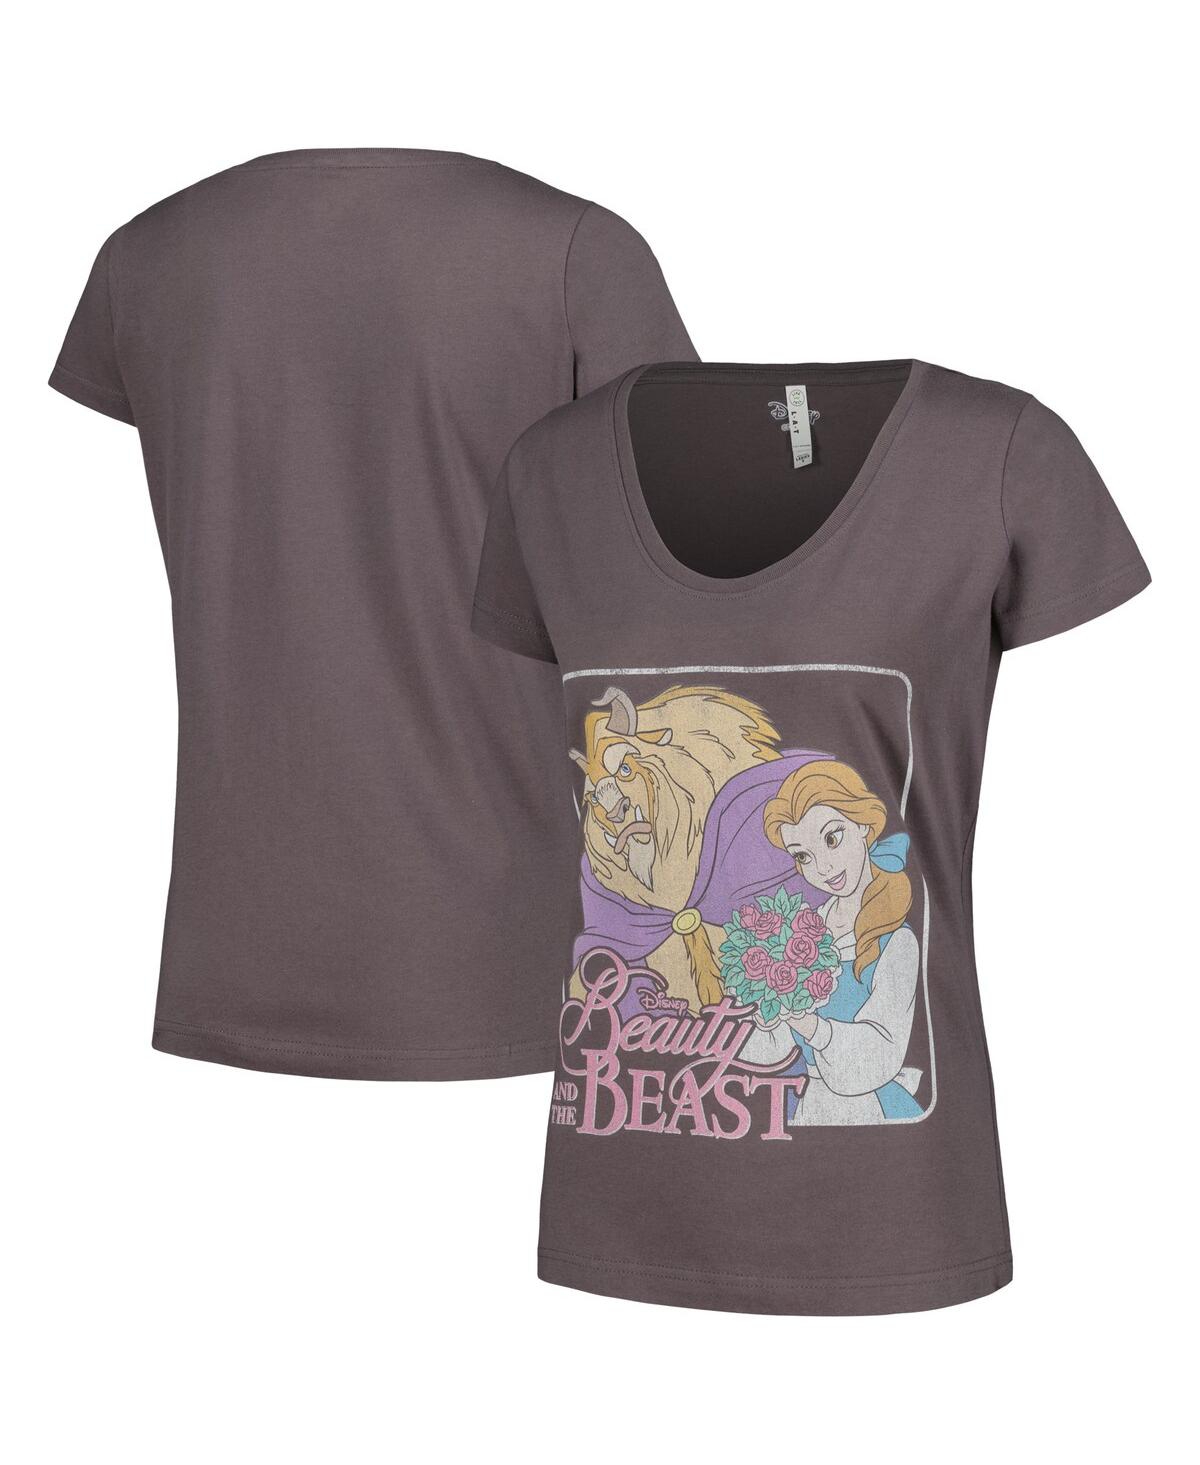 Women's Mad Engine Charcoal Beauty and the Beast Graphic Scoop Neck T-shirt - Charcoal